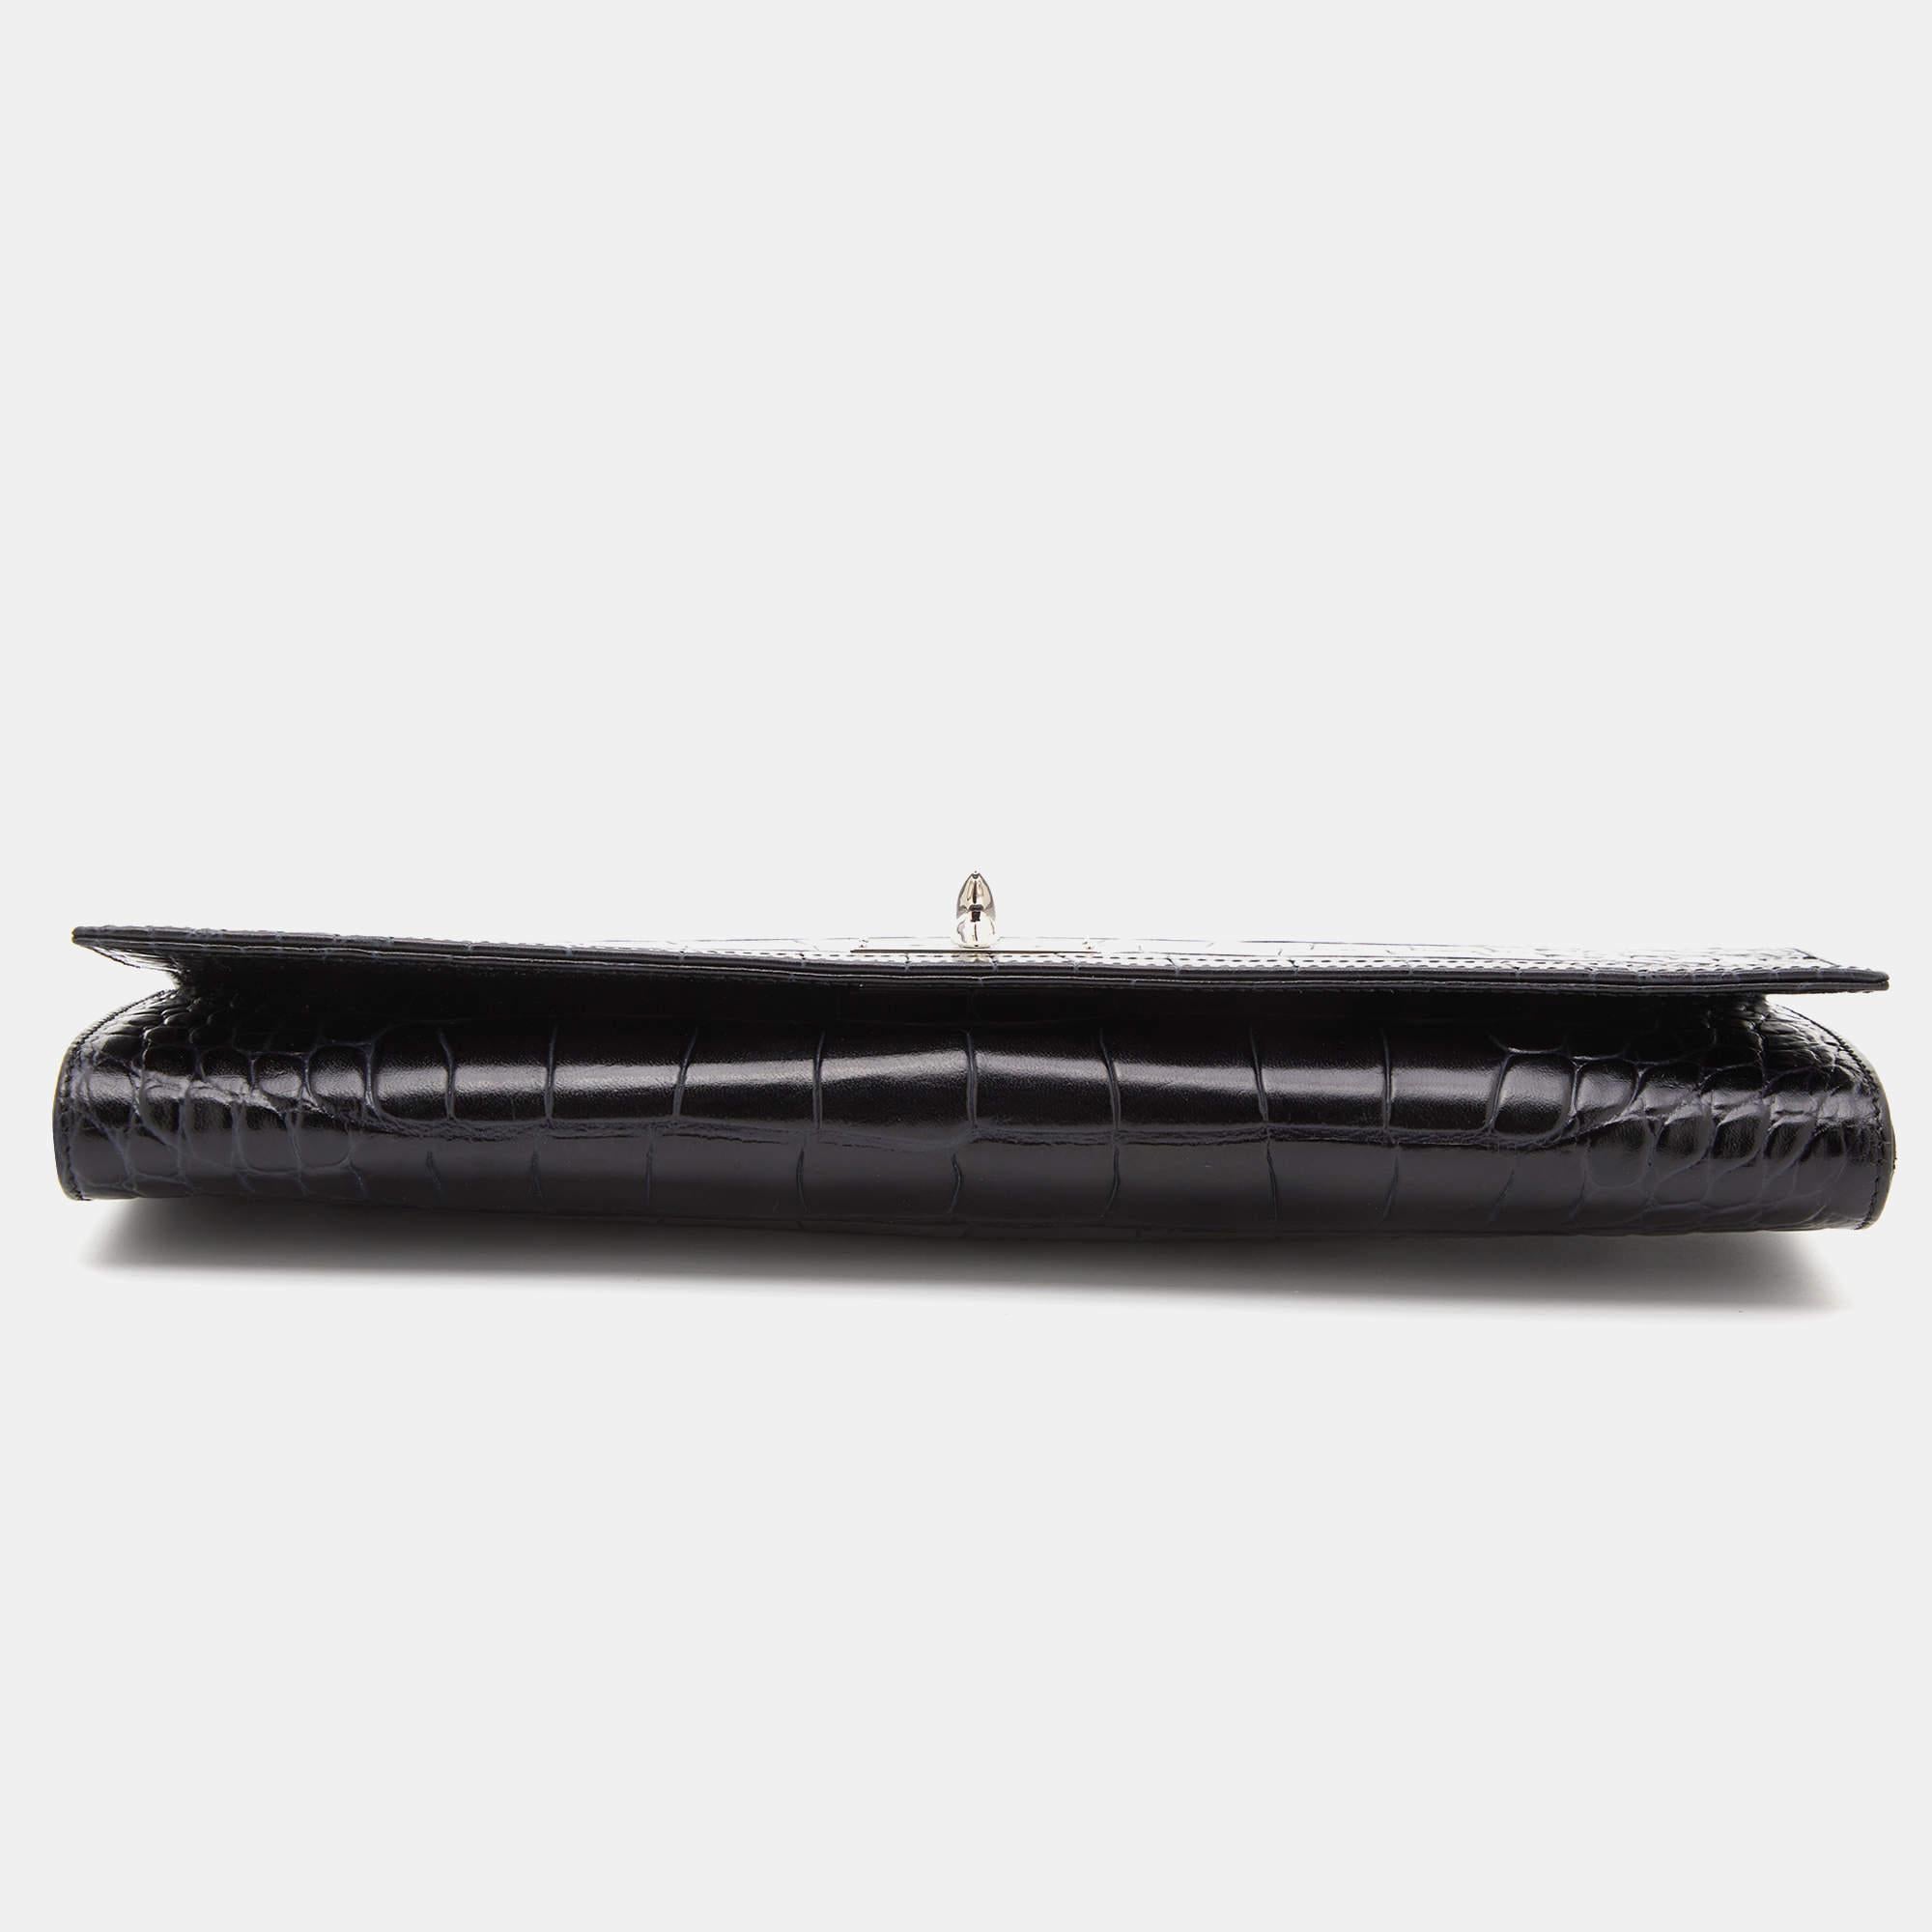 Crafted from quality materials, your wardrobe is missing out on this beautifully made designer clutch. Look your fashionable best in any outfit with this stylish clutch that promises to elevate your ensemble.

Includes: Original Dustbag